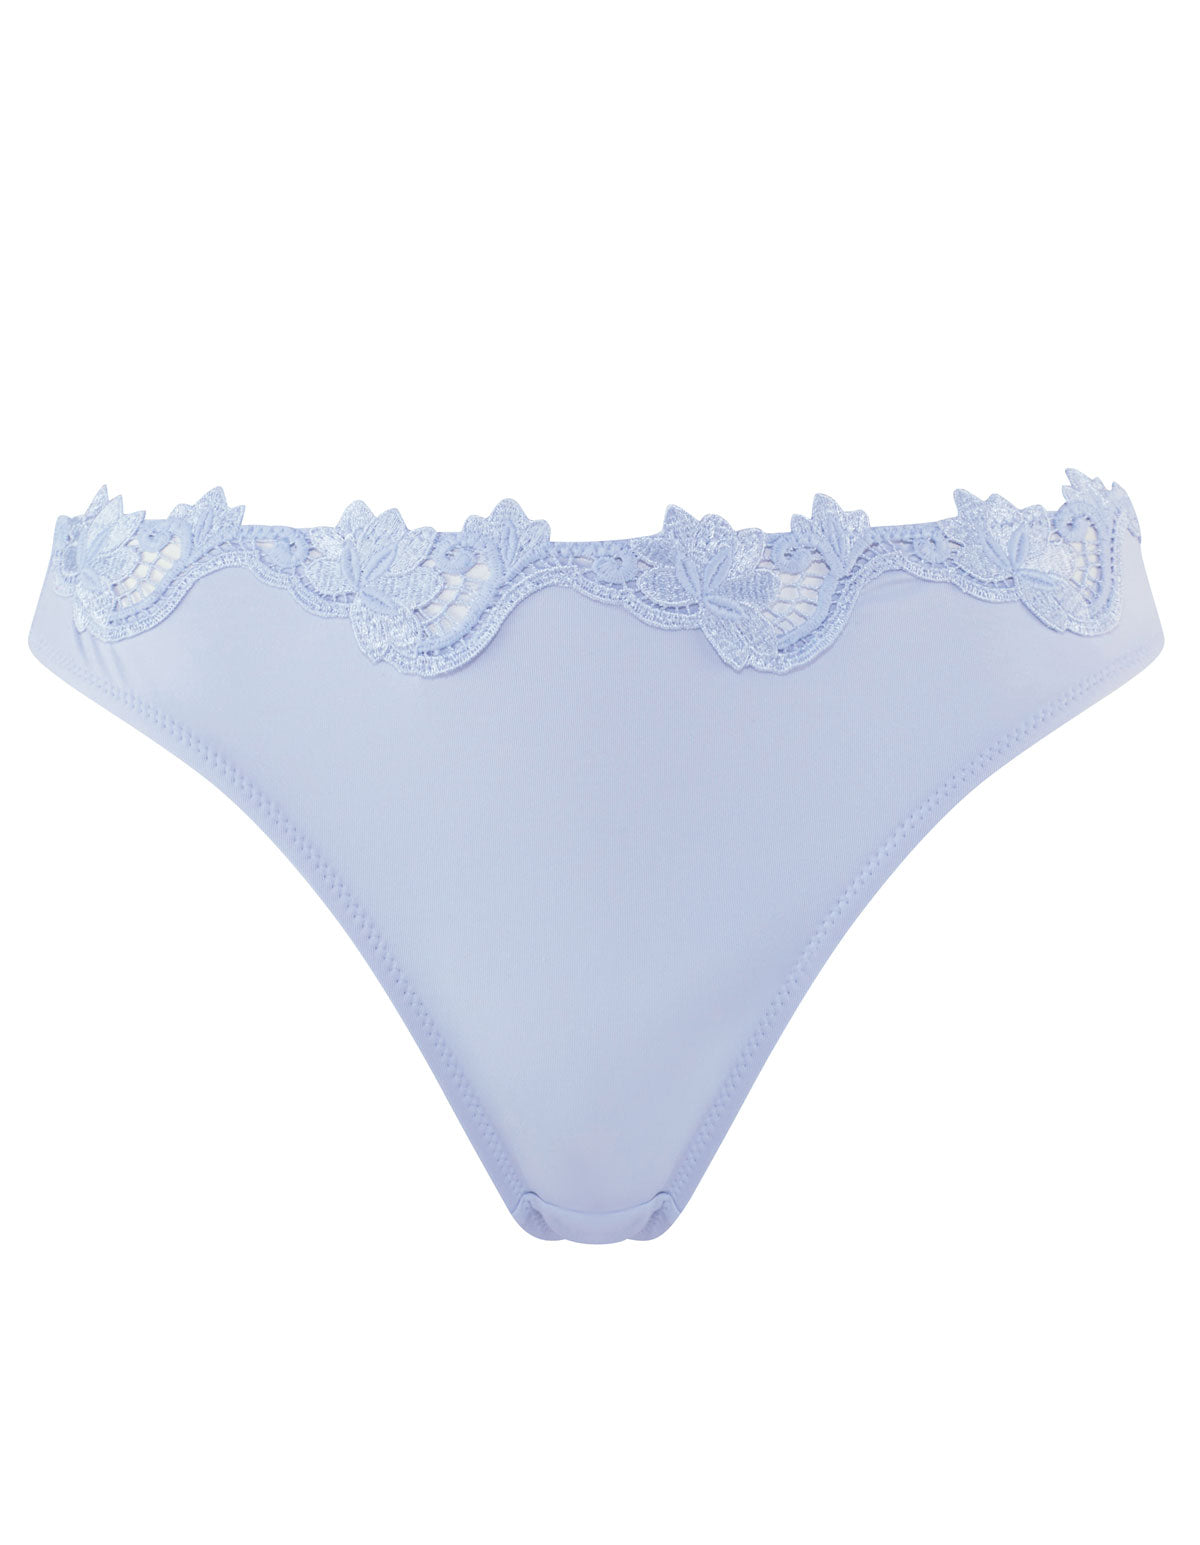 Guy de France 61104-C Ice Blue Embroidered Thong